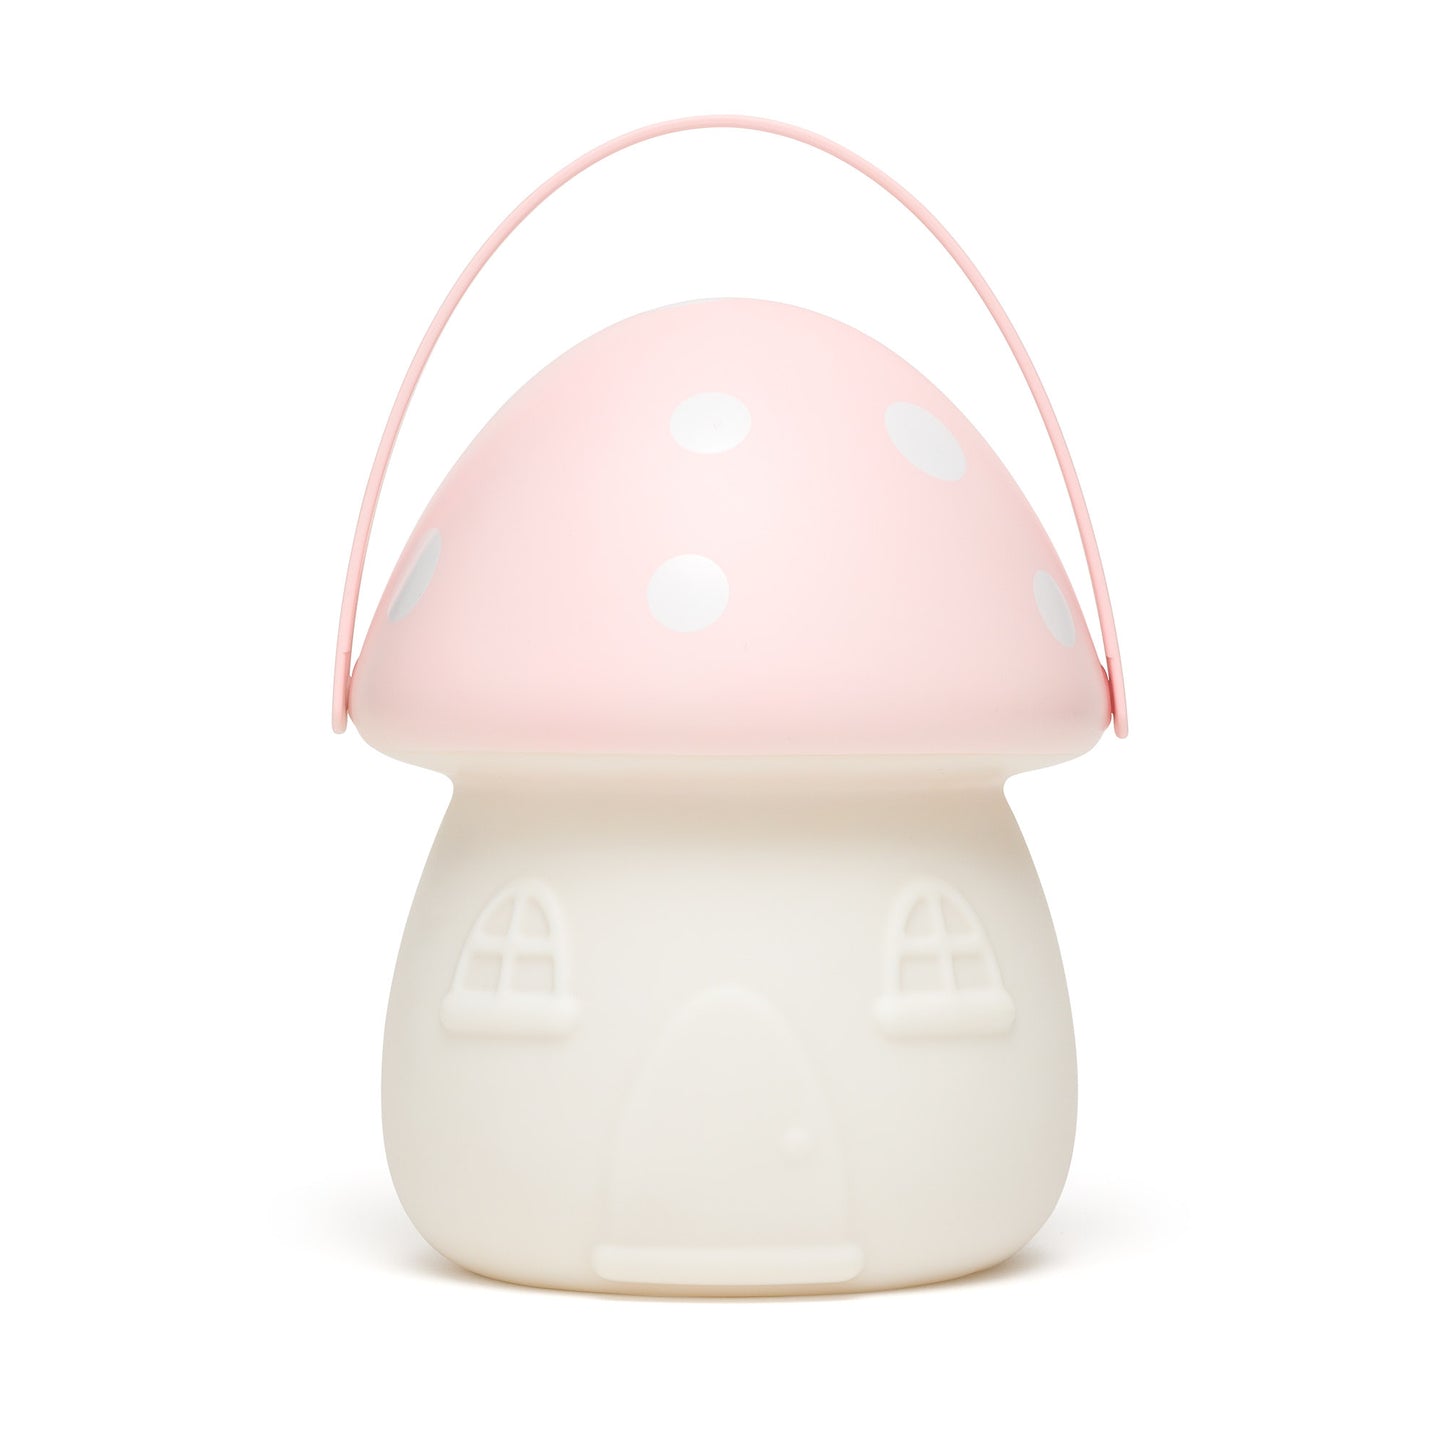 Fairy House Carry Nightlight - Pink|White